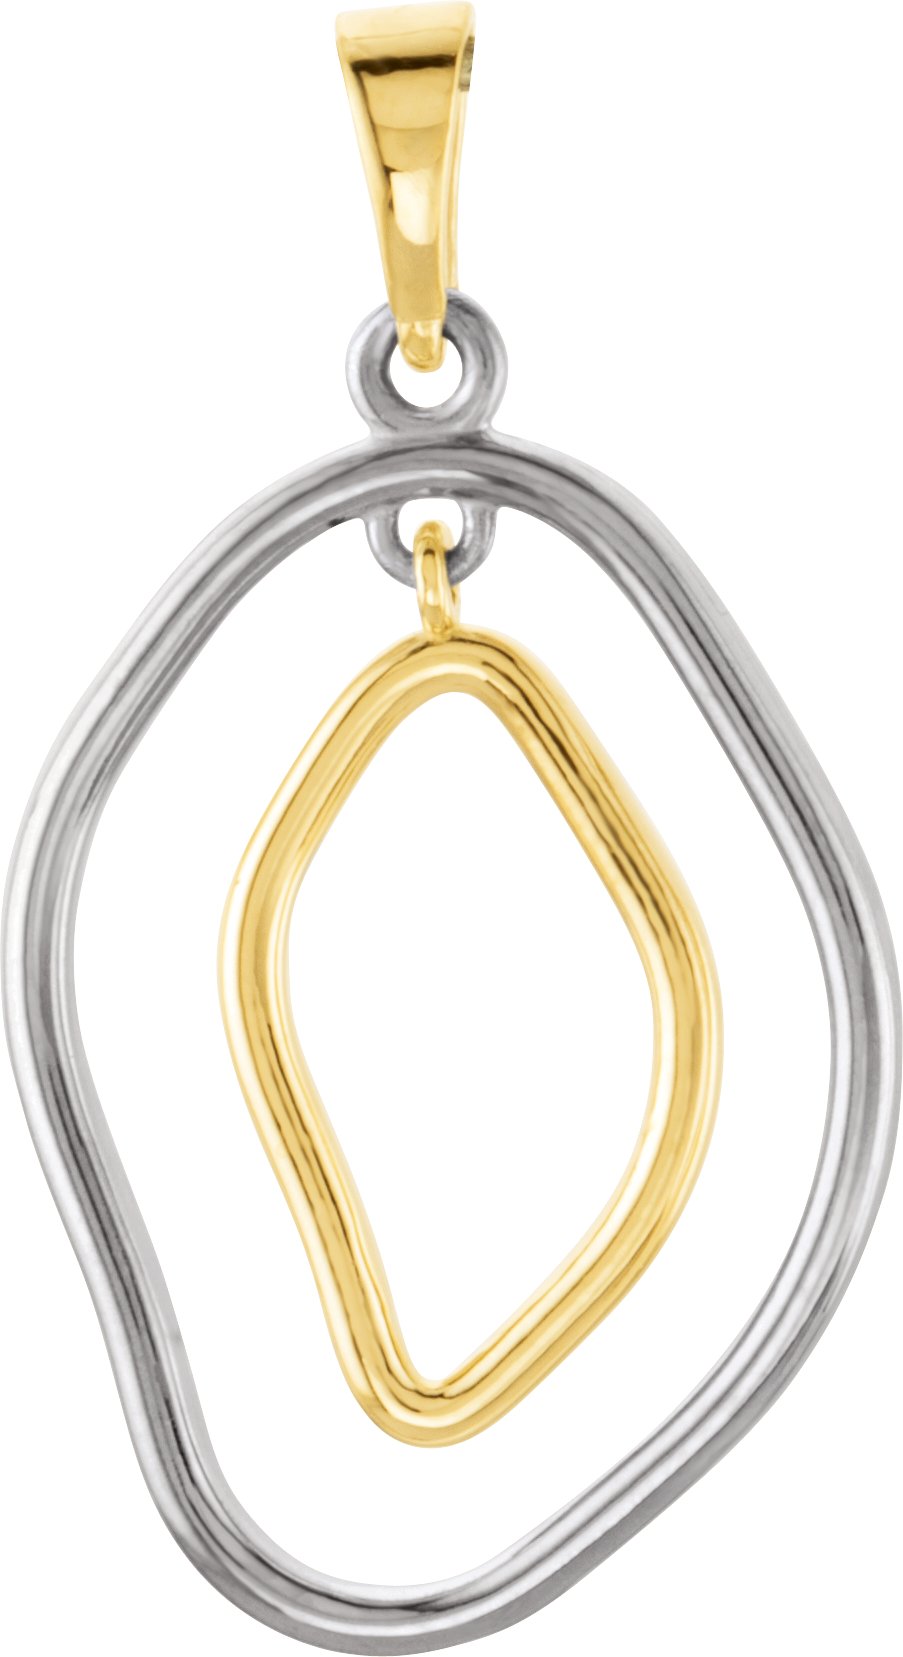 Sterling Silver and 14K Yellow Geometric Pendant Ref. 3418619